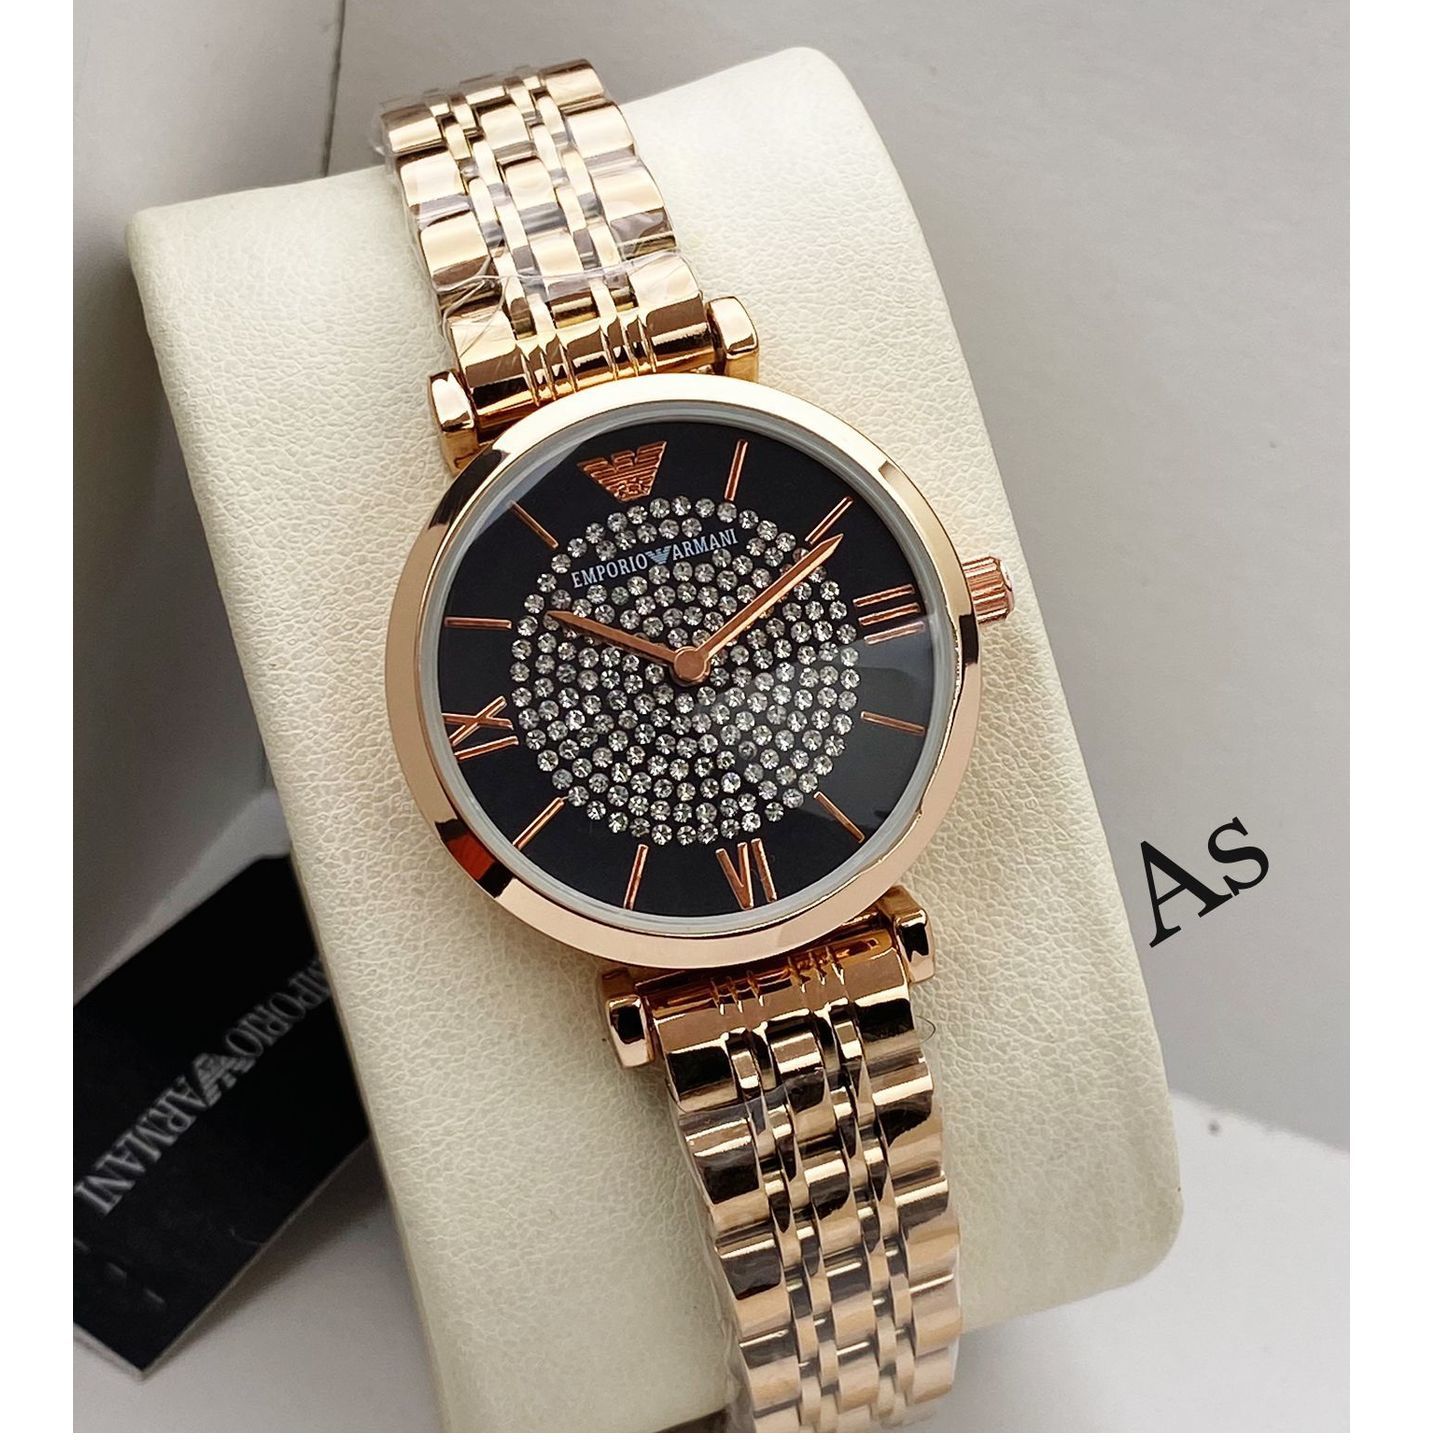 Ladies Rose Gold Black Armani Watch Gift  Engagement, anniversary, valentines day, mothers day for sister, wife,friend,mother, baby shower